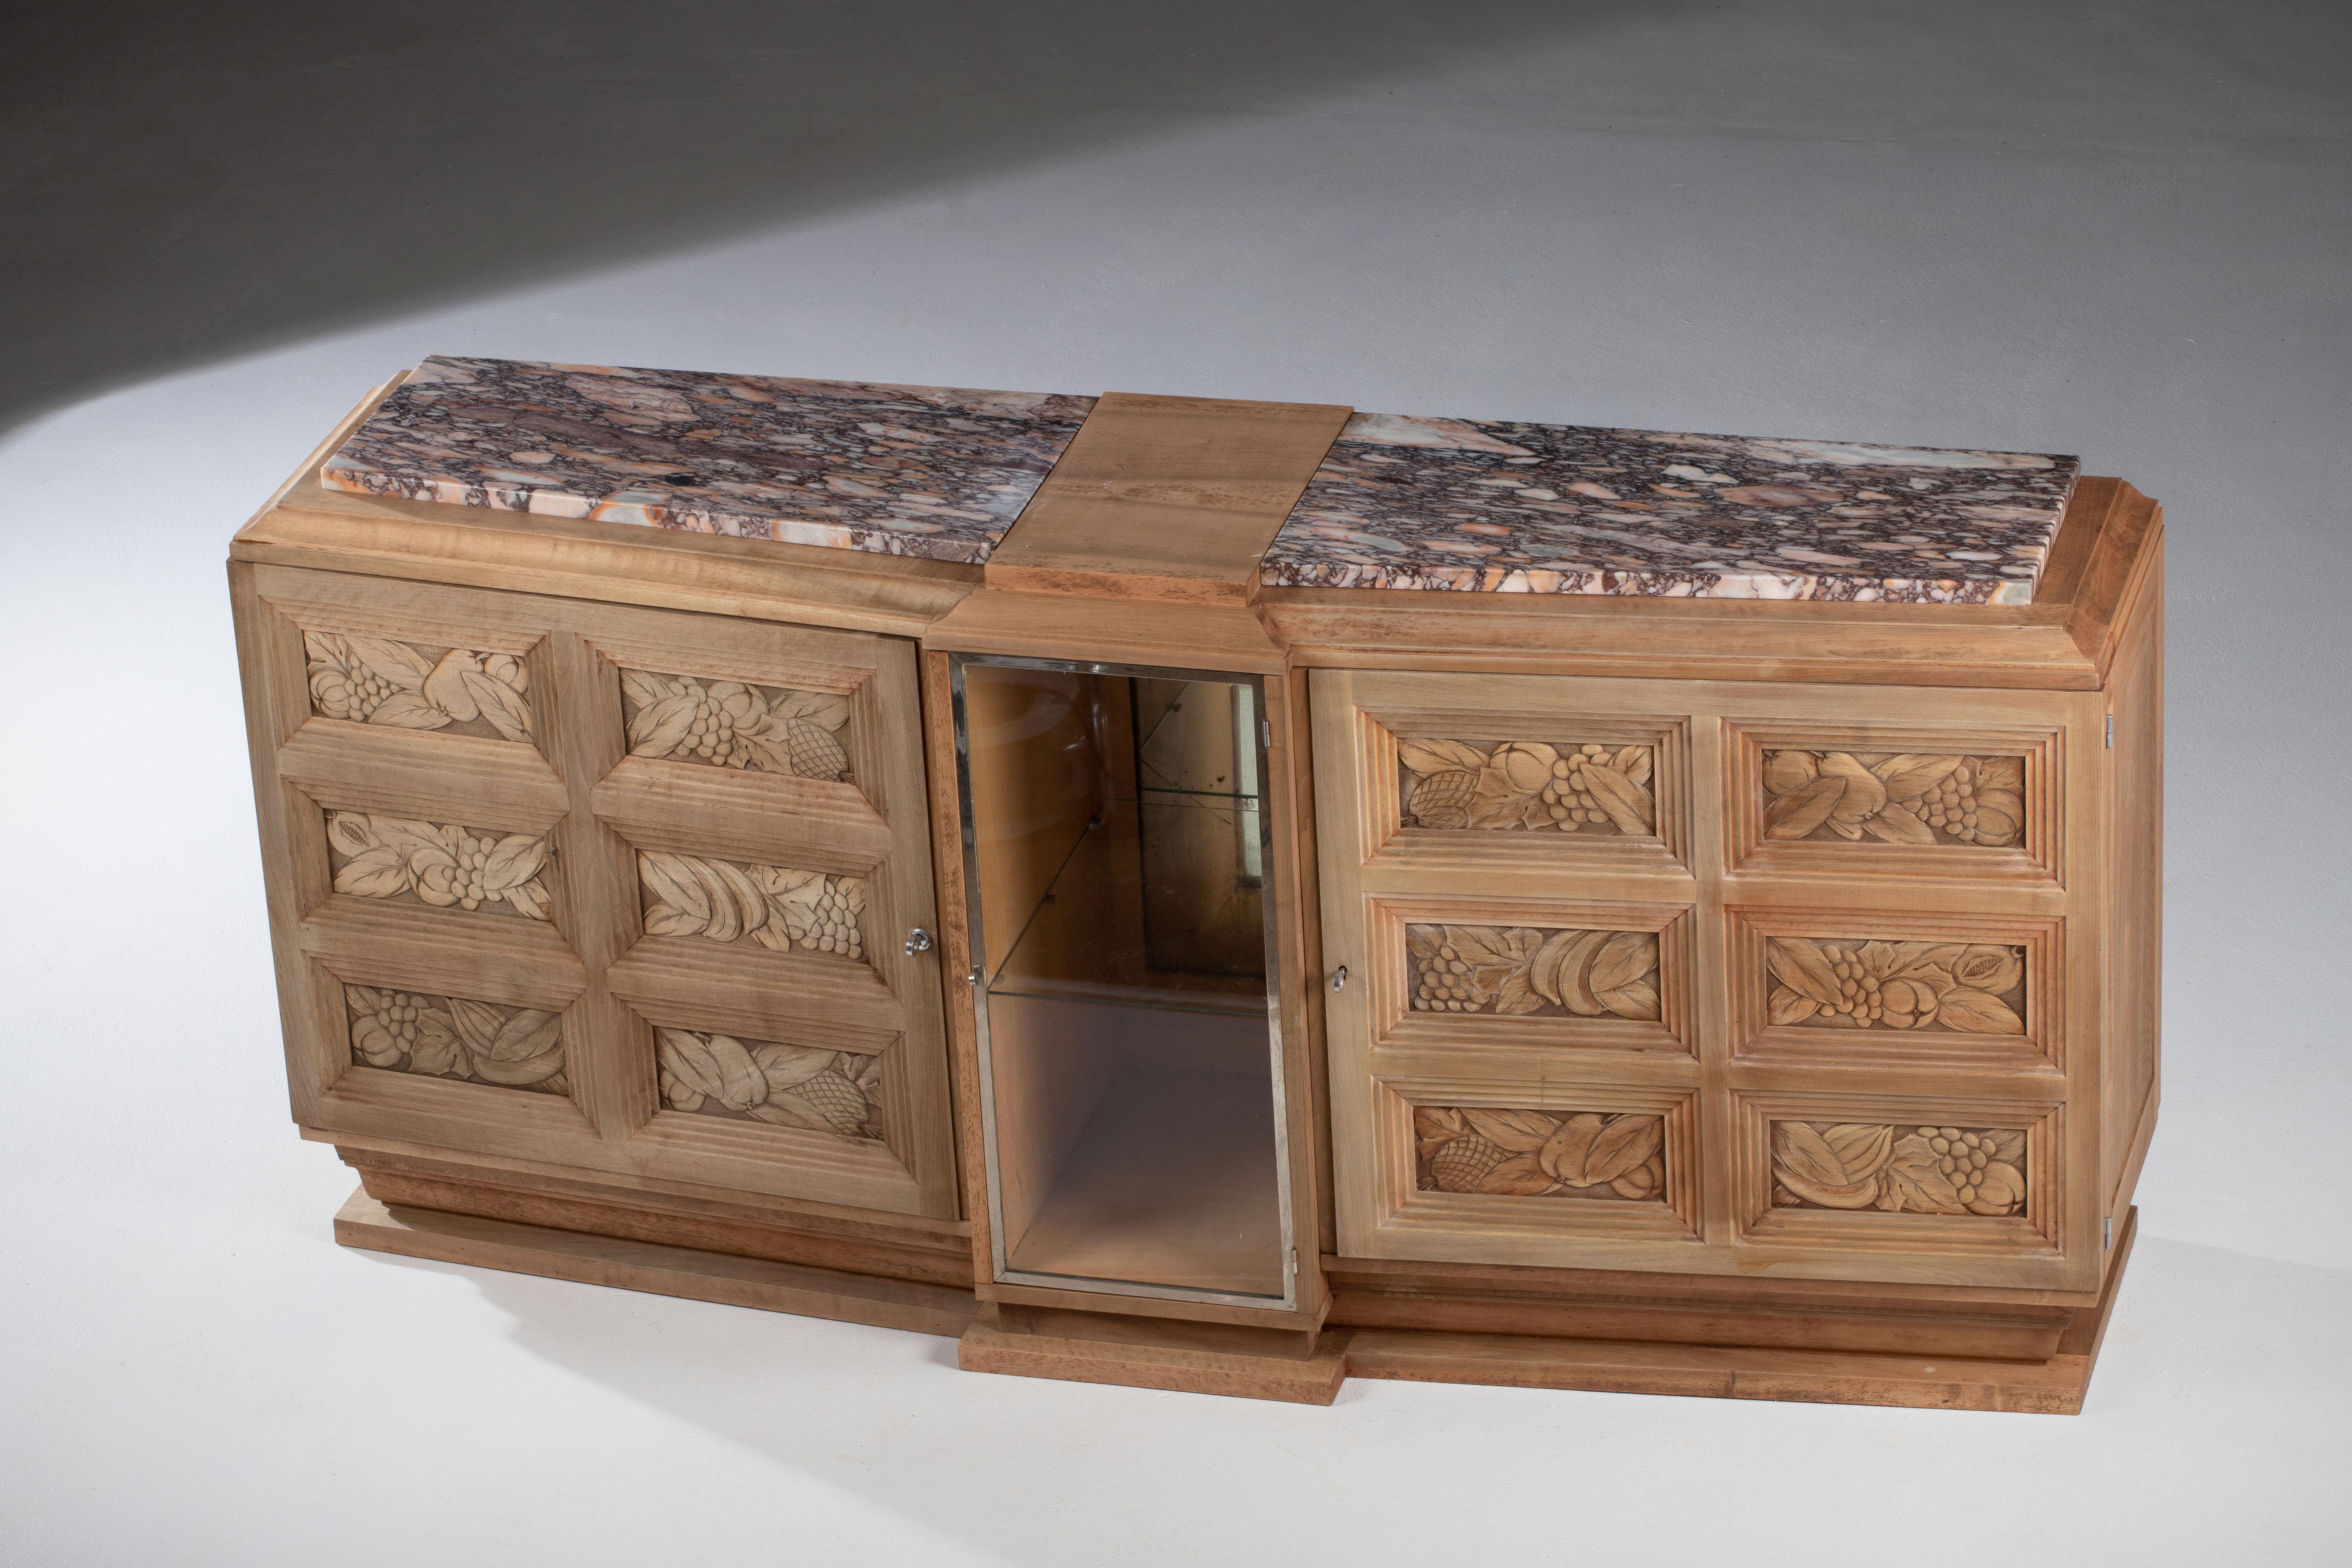 Very elegant credenza in solid oak, France, 1940s.
Art Deco Brutalist sideboard. 
The credenza consists of Two storage facilities covered with handcarved fruits designed doors and a central vitrine.

